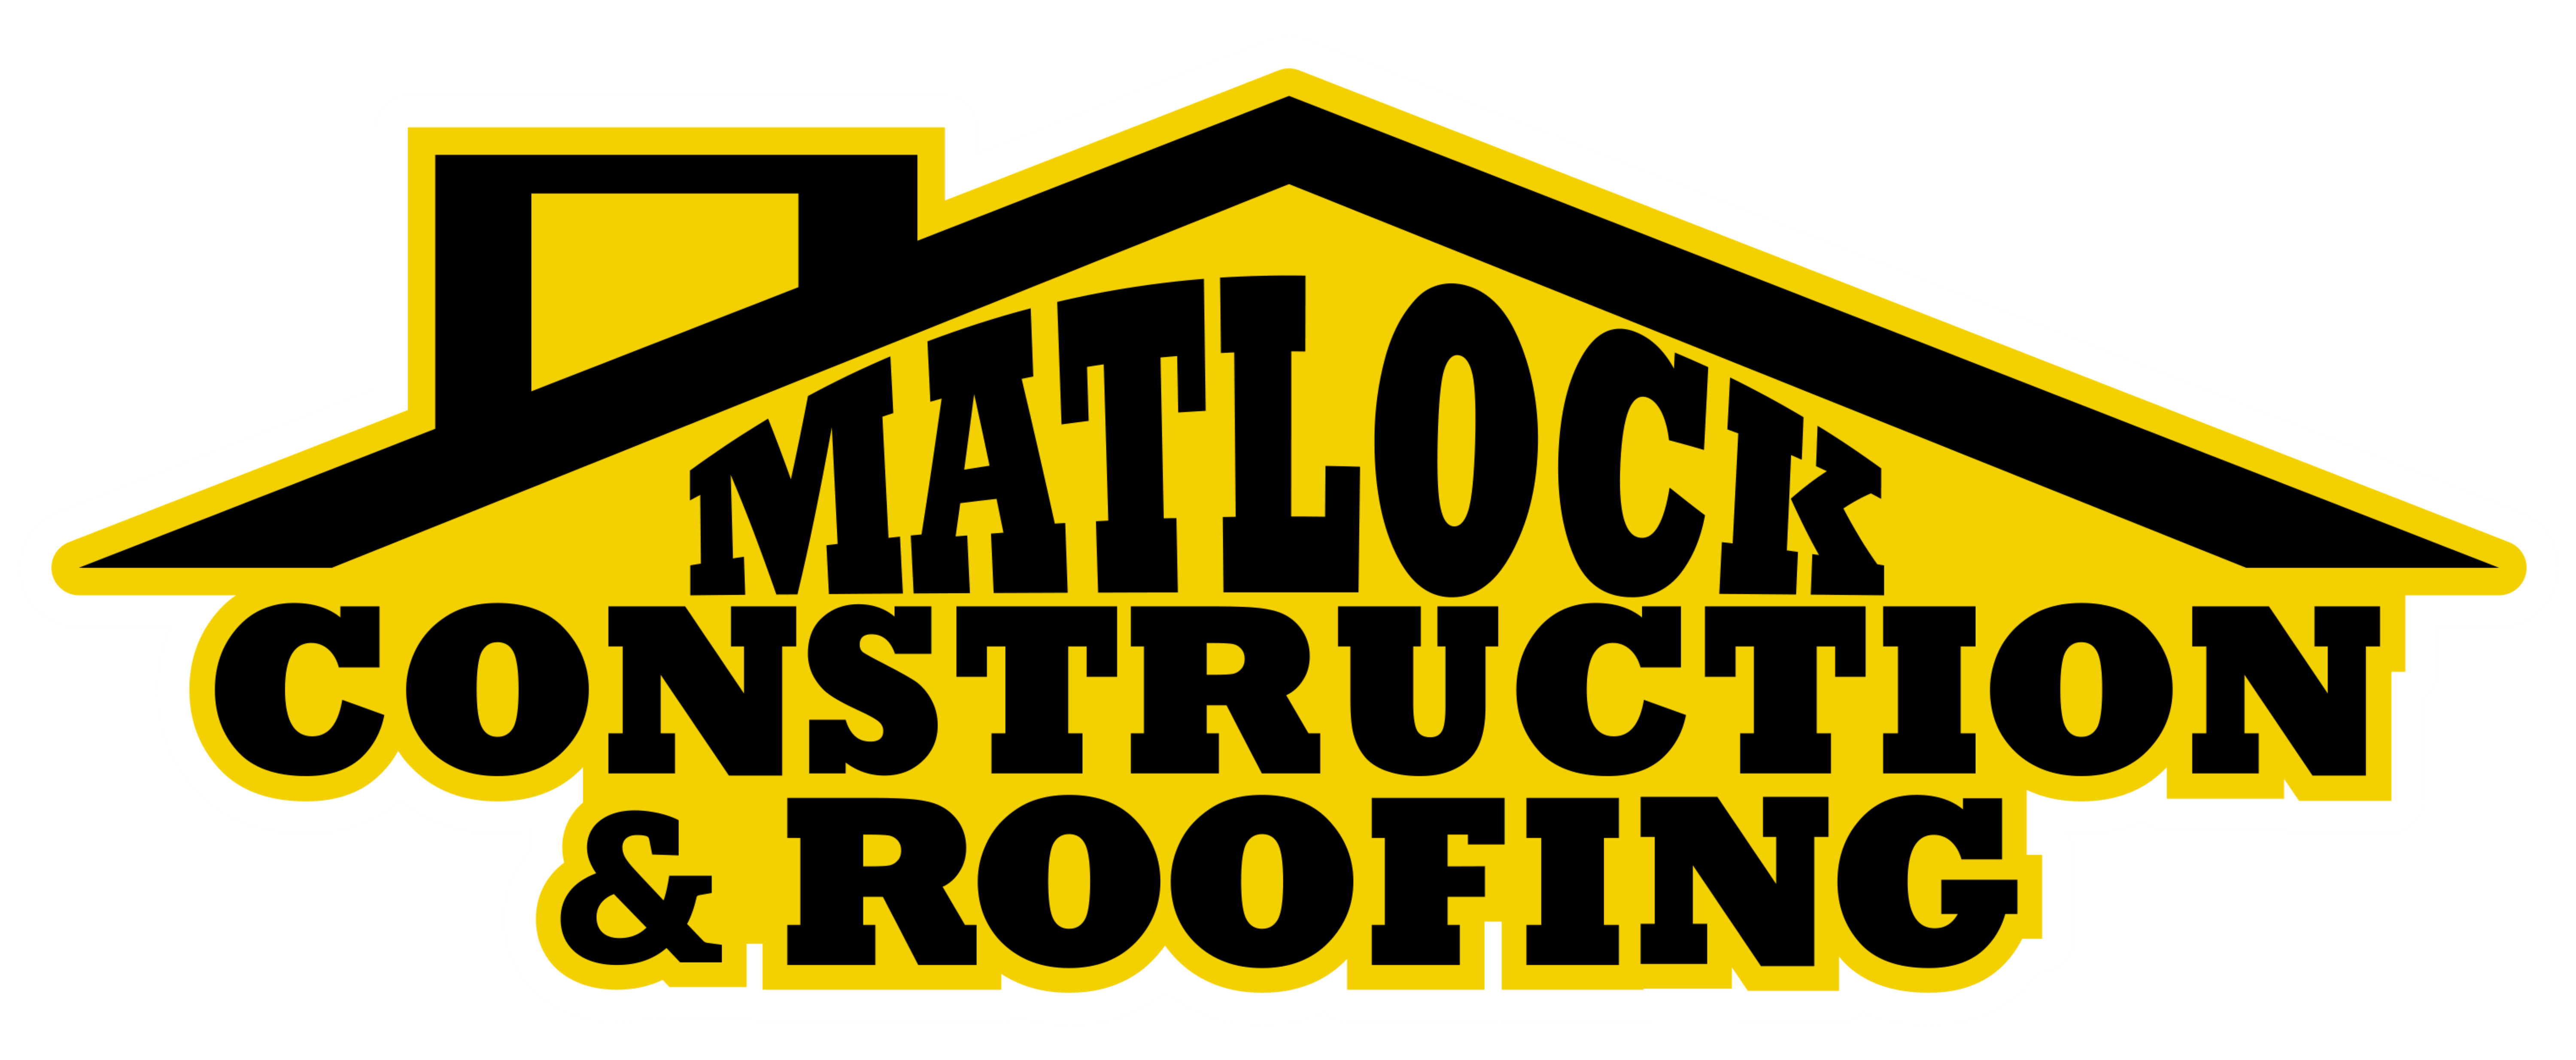 Matlock Logo - Matlock Construction Inc | Roofing in Mississippi —Free roof inspection